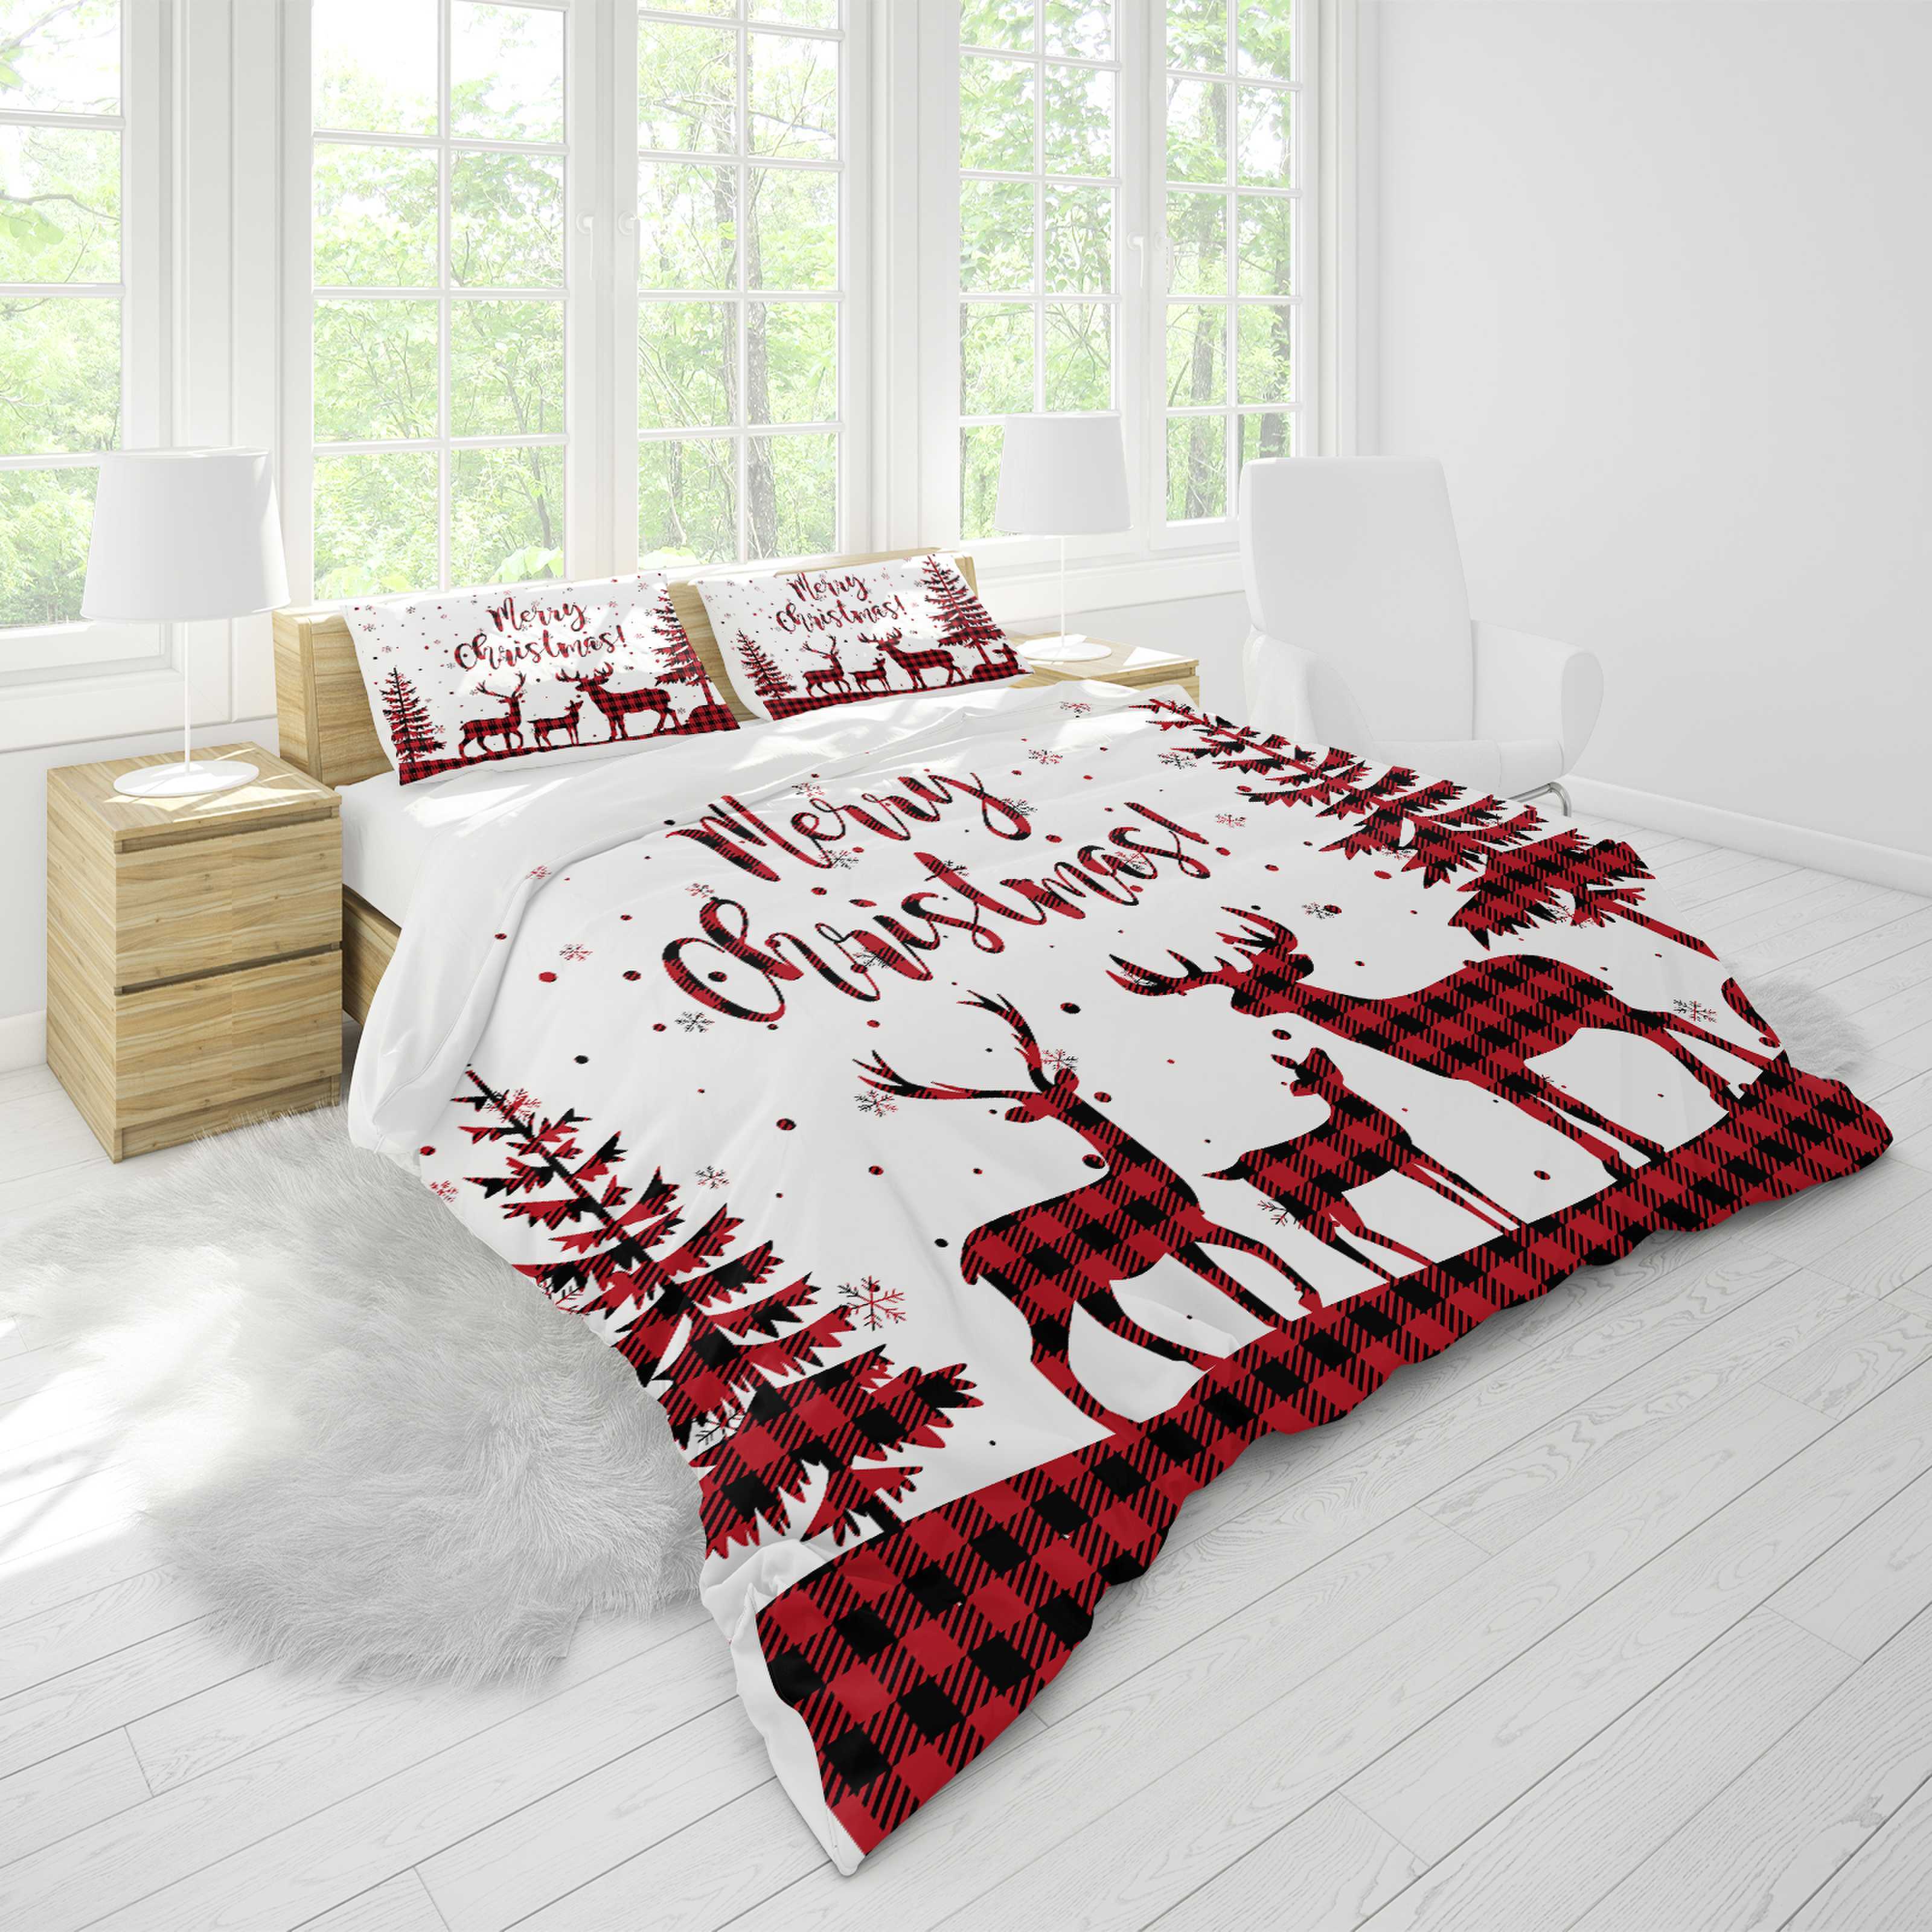 CHRISTMAS BEDDING 2022 - Decorate with Tip and More